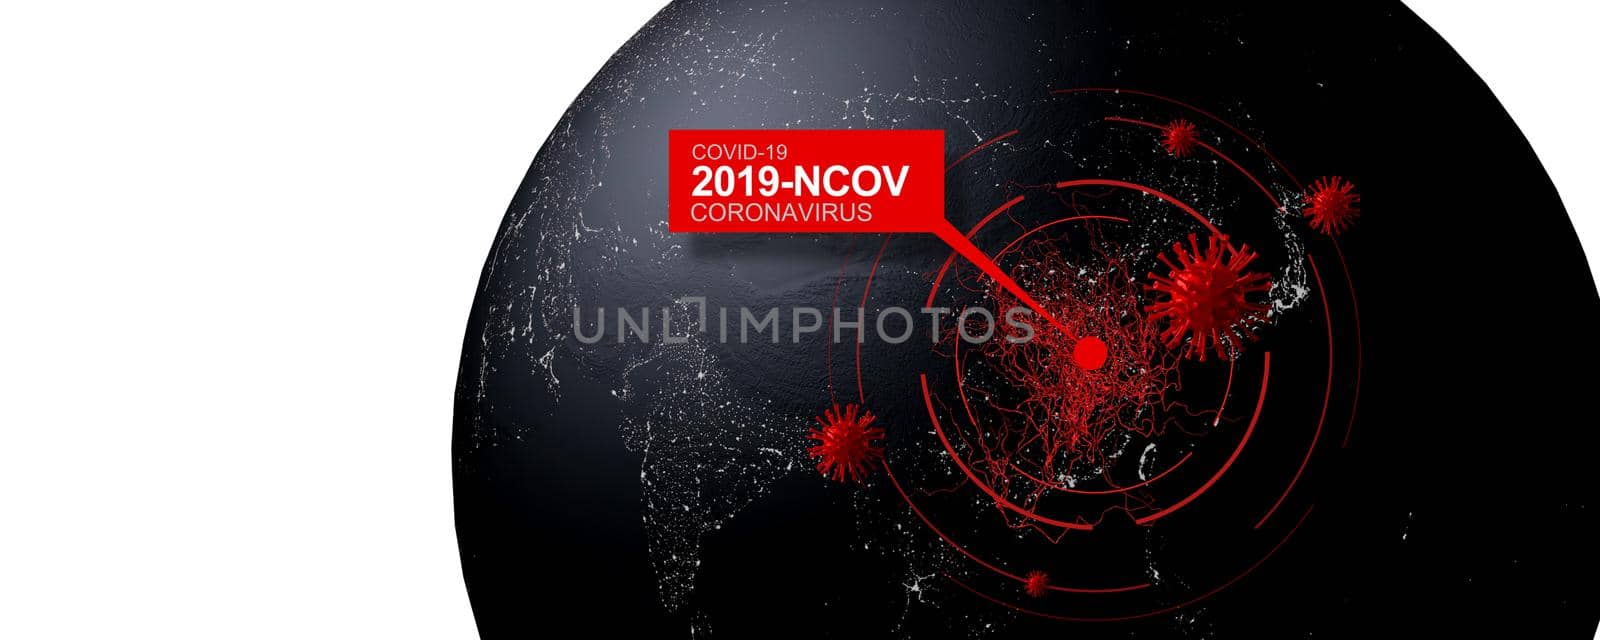 Global Covid-19 conoravirus outbreak. 3D illustration. Elements of this image furnished by NASA. by Taut